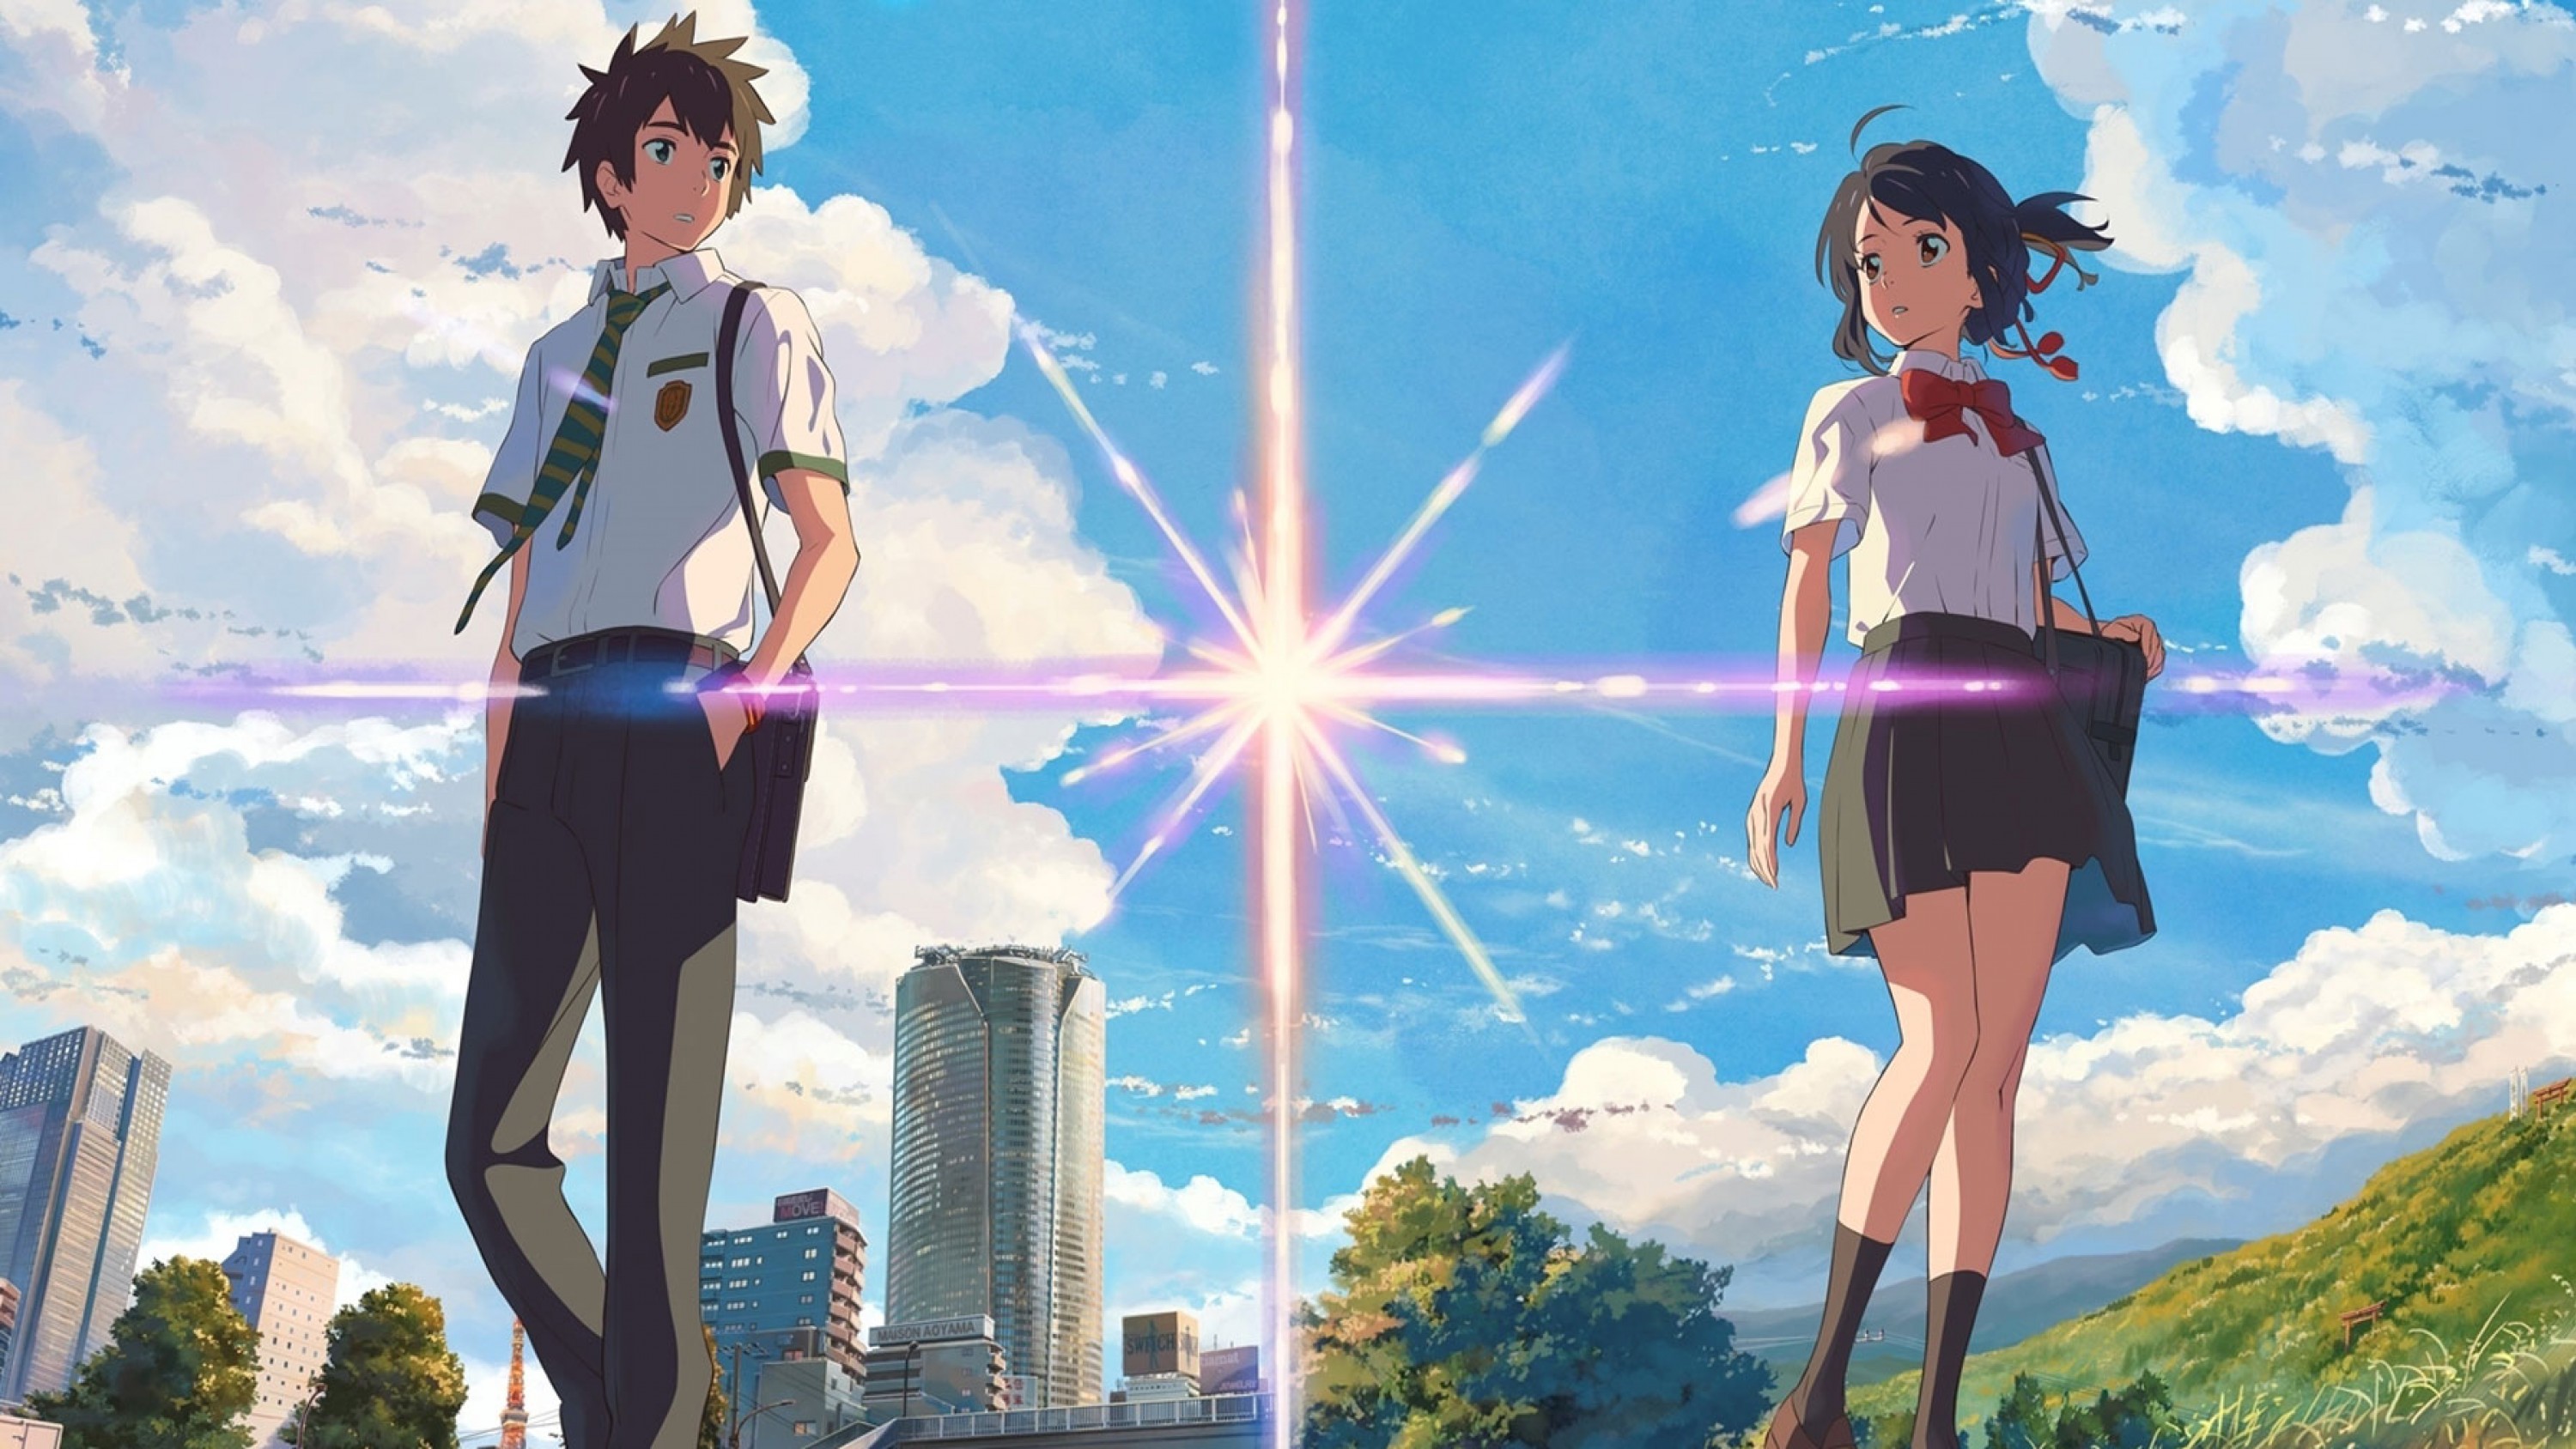 Resource - Your Name: Film Guide - Into Film